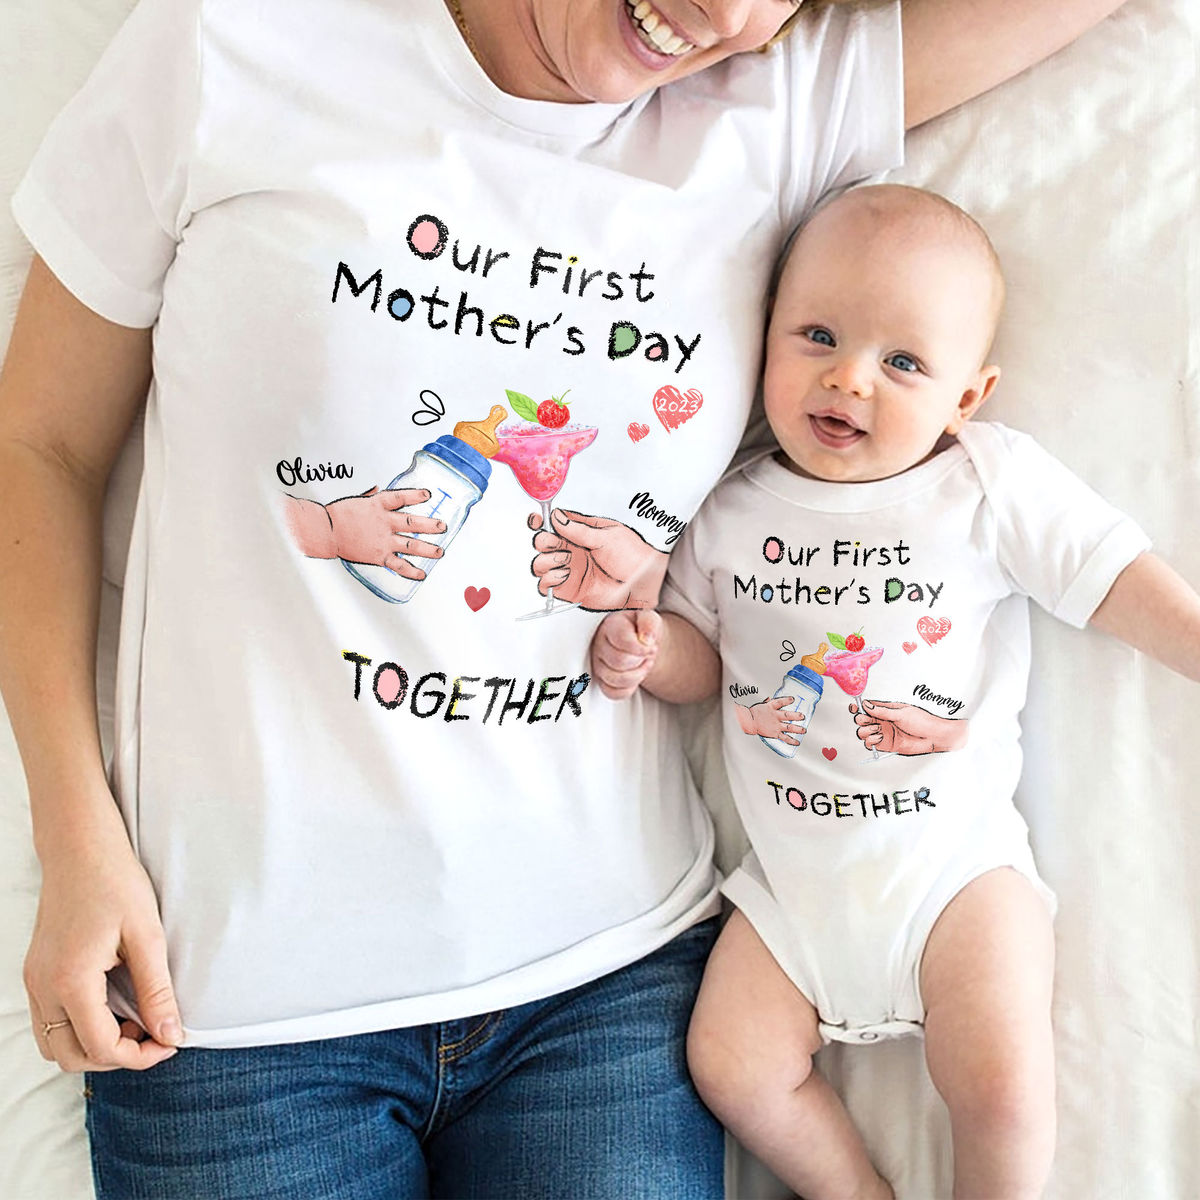 Our First Mother's Day Matching Outfit (Onesie and TShirt Set) - Wine n Milk